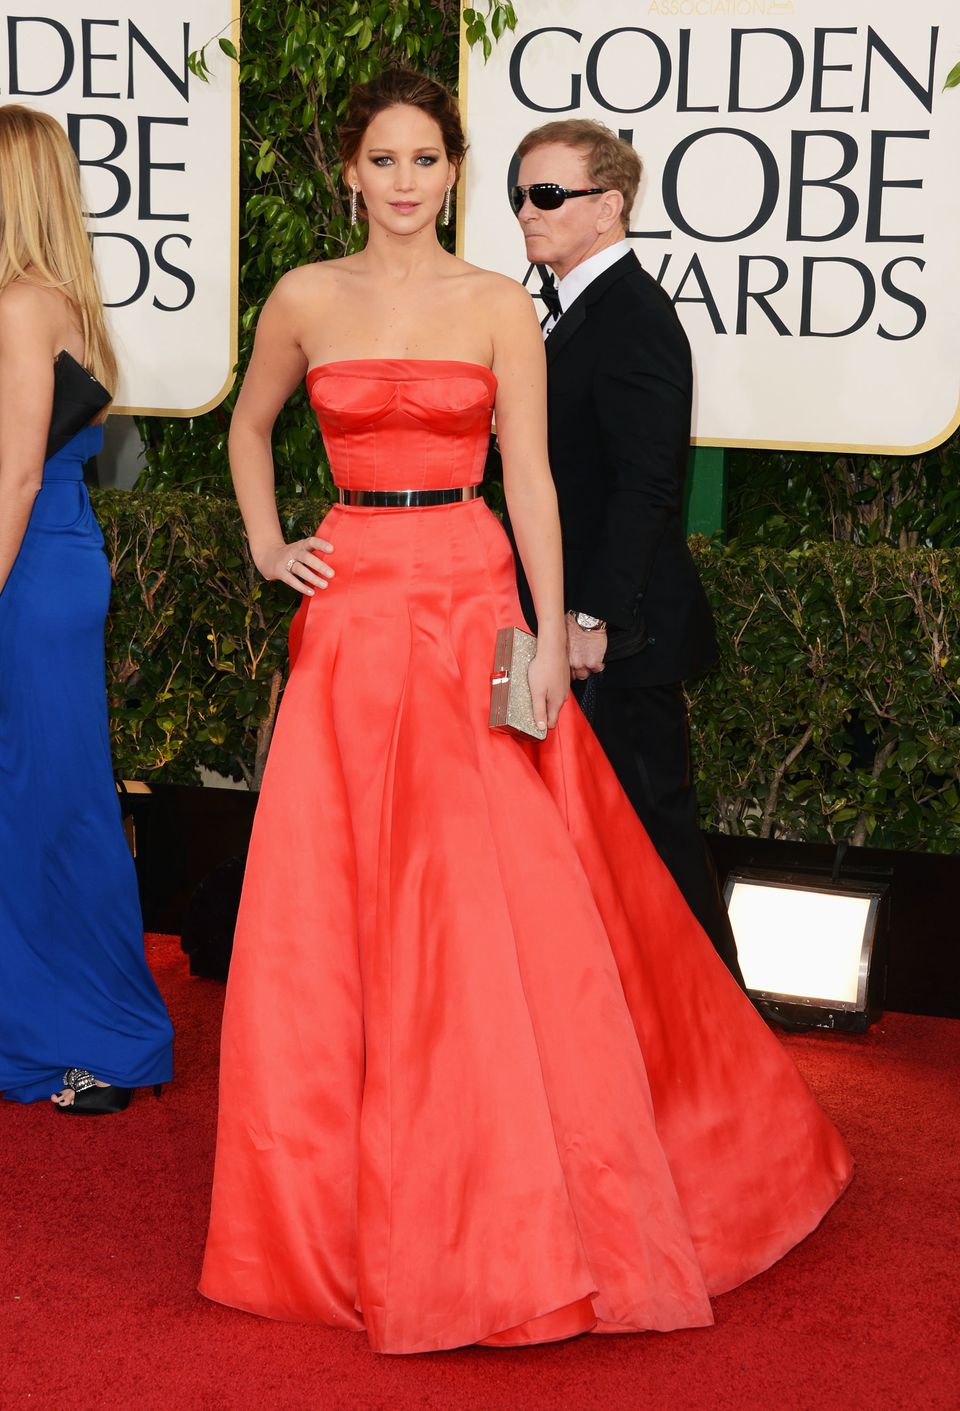 Nicole Kidman's Louis Vuitton Gown at the Globes – The Hollywood